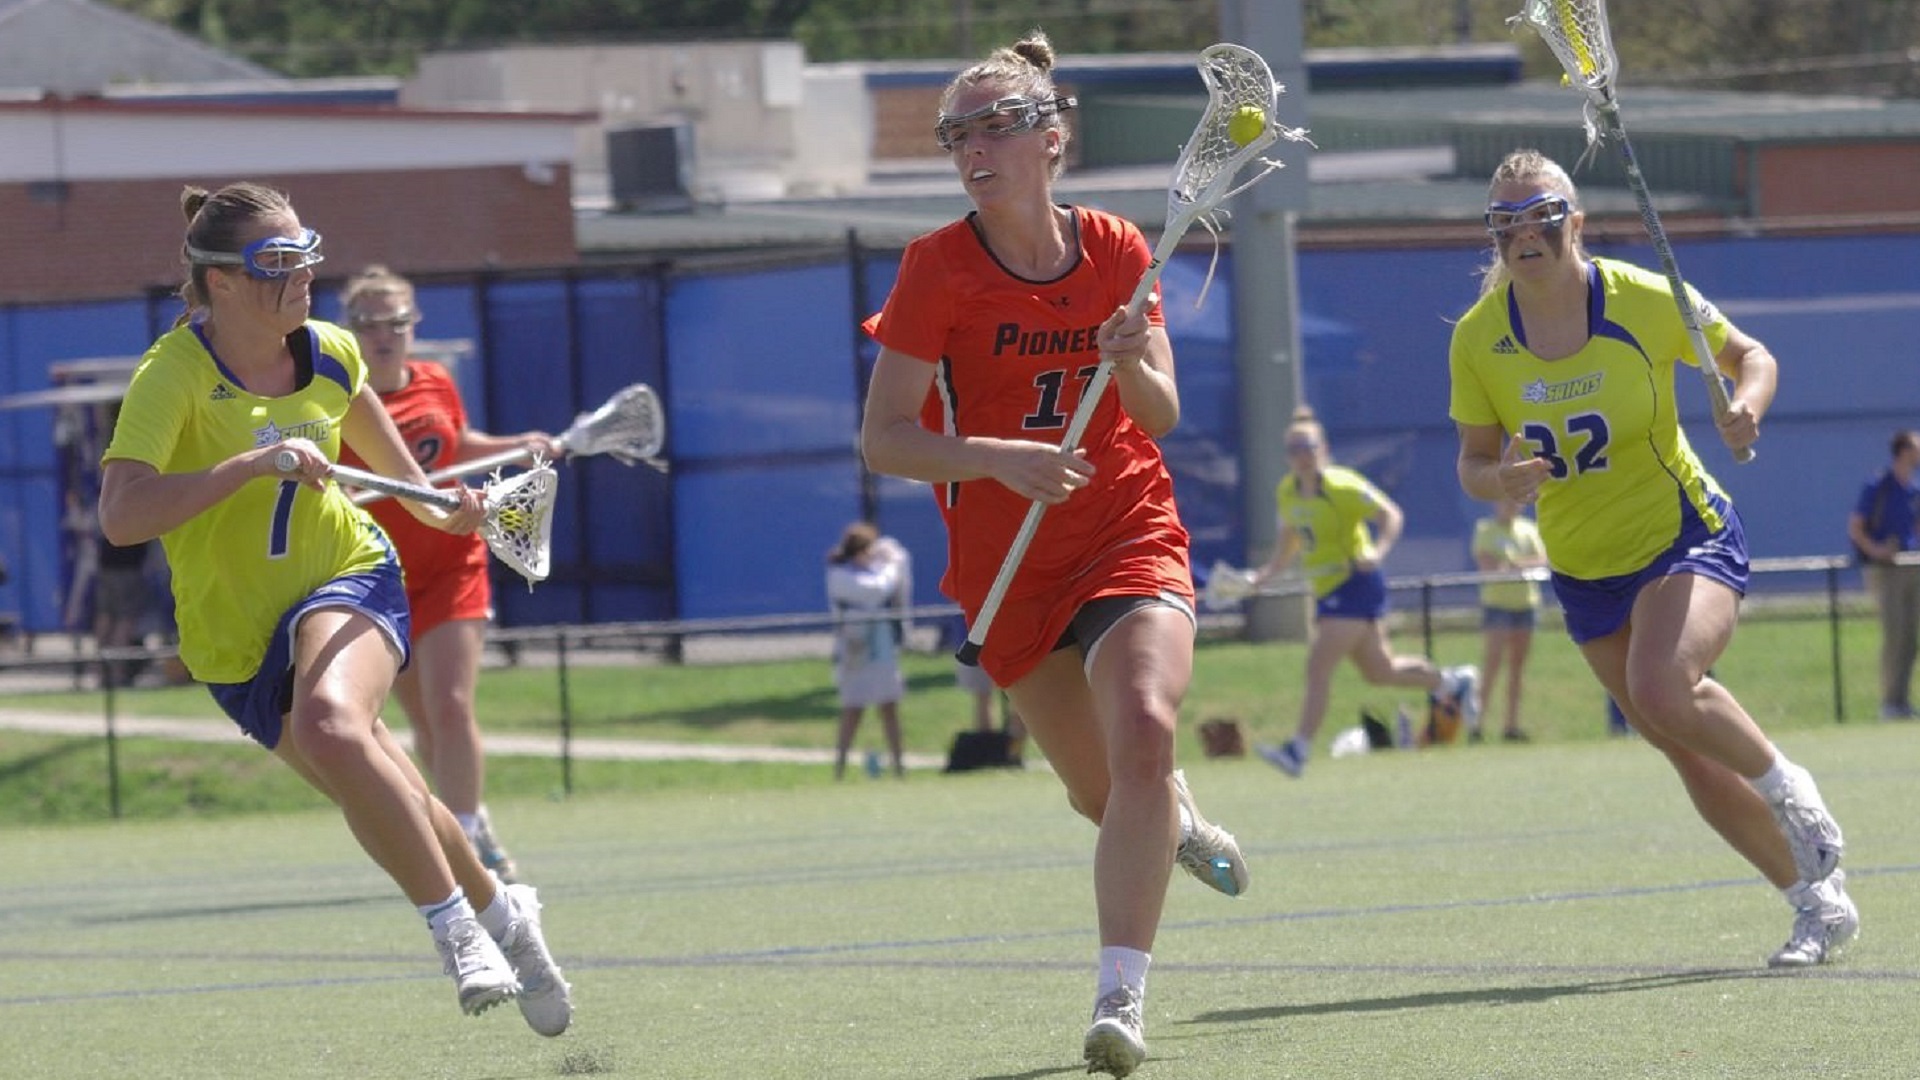 Tia Daniel had two goals for the Pioneers against Limestone (photo by Chris Lenker)